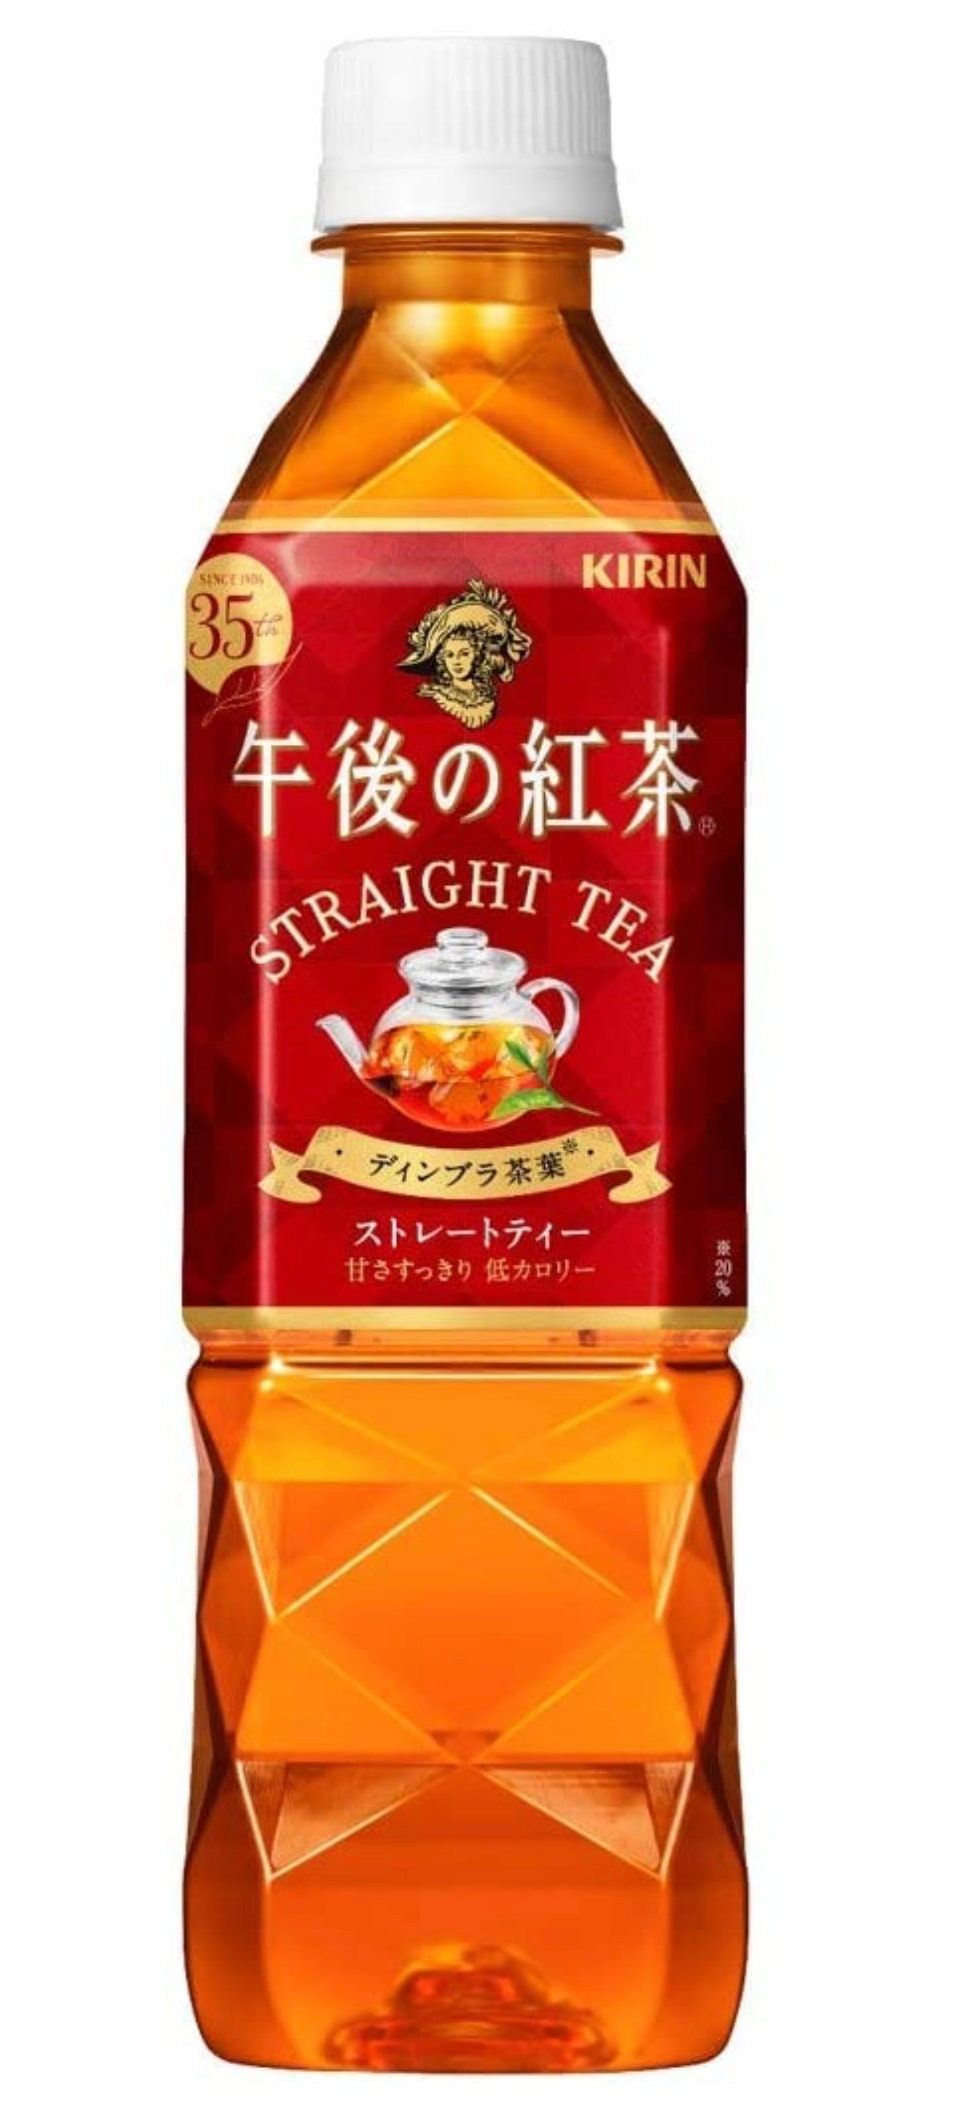 Kirin Afternoon Tea Straight 16.9 Fl.oz. | 500Ml Pet Bottle - Made in Japan Limited Quantity. Free Shipping